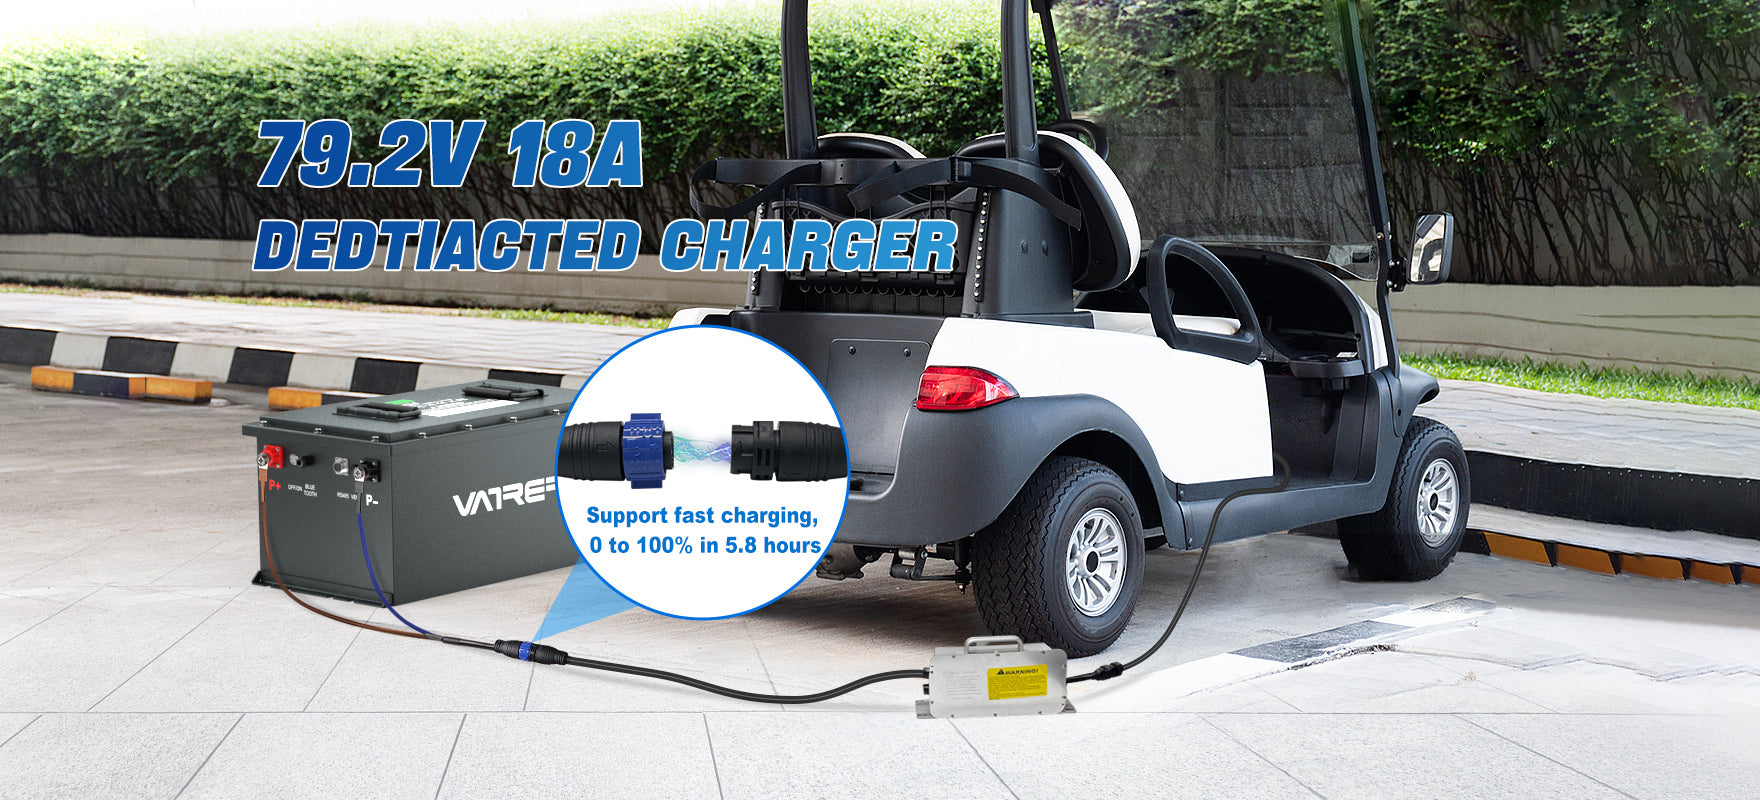 Rapid Charging with 79.2V 18A Dedicated Charger